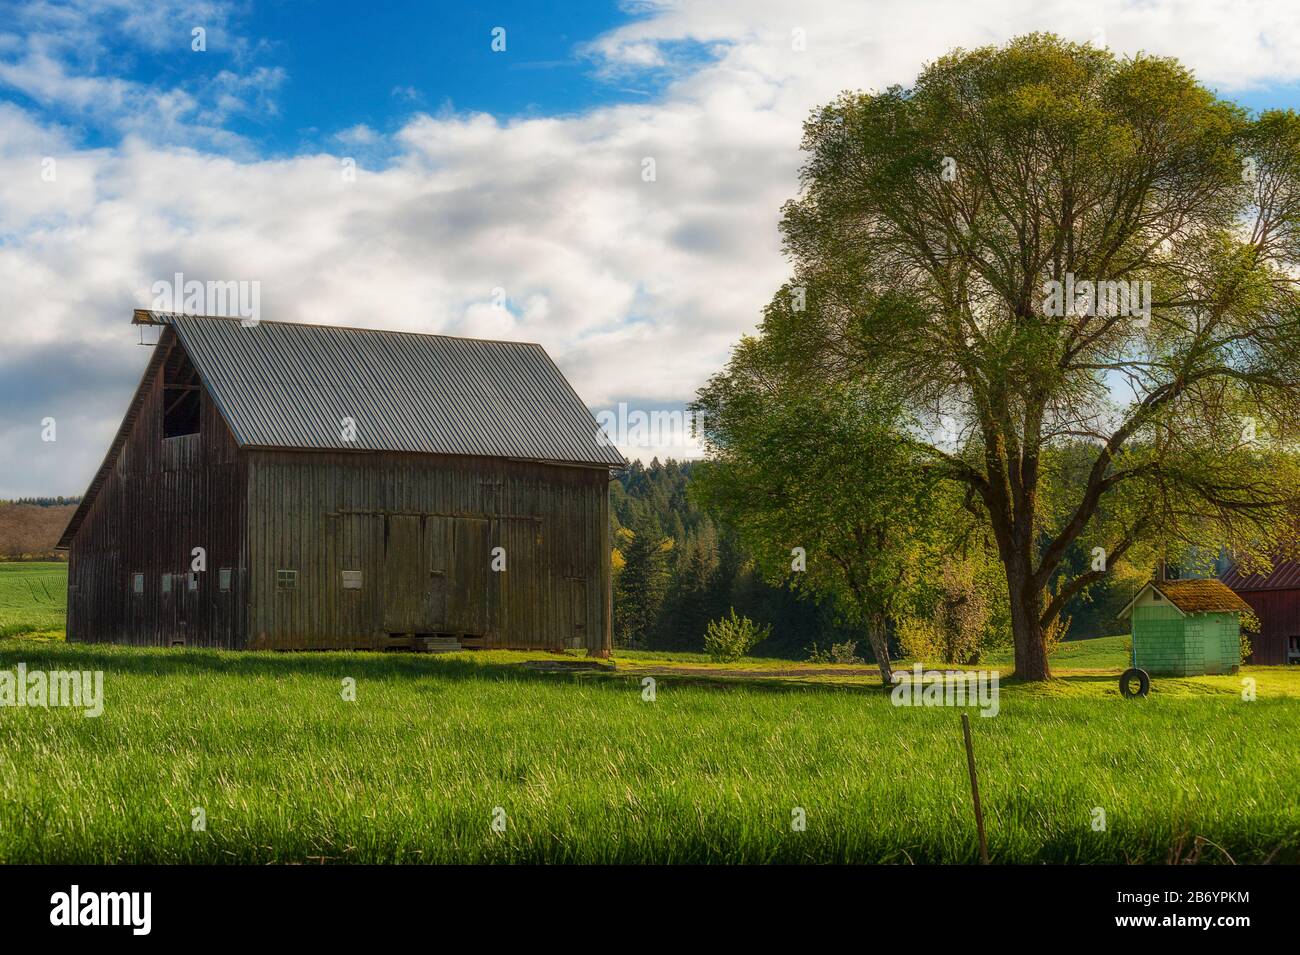 Country side scene of a barn with lush green surroundings and a white oak tree with a tire swing under cloudy skies in rural Oregon Stock Photo